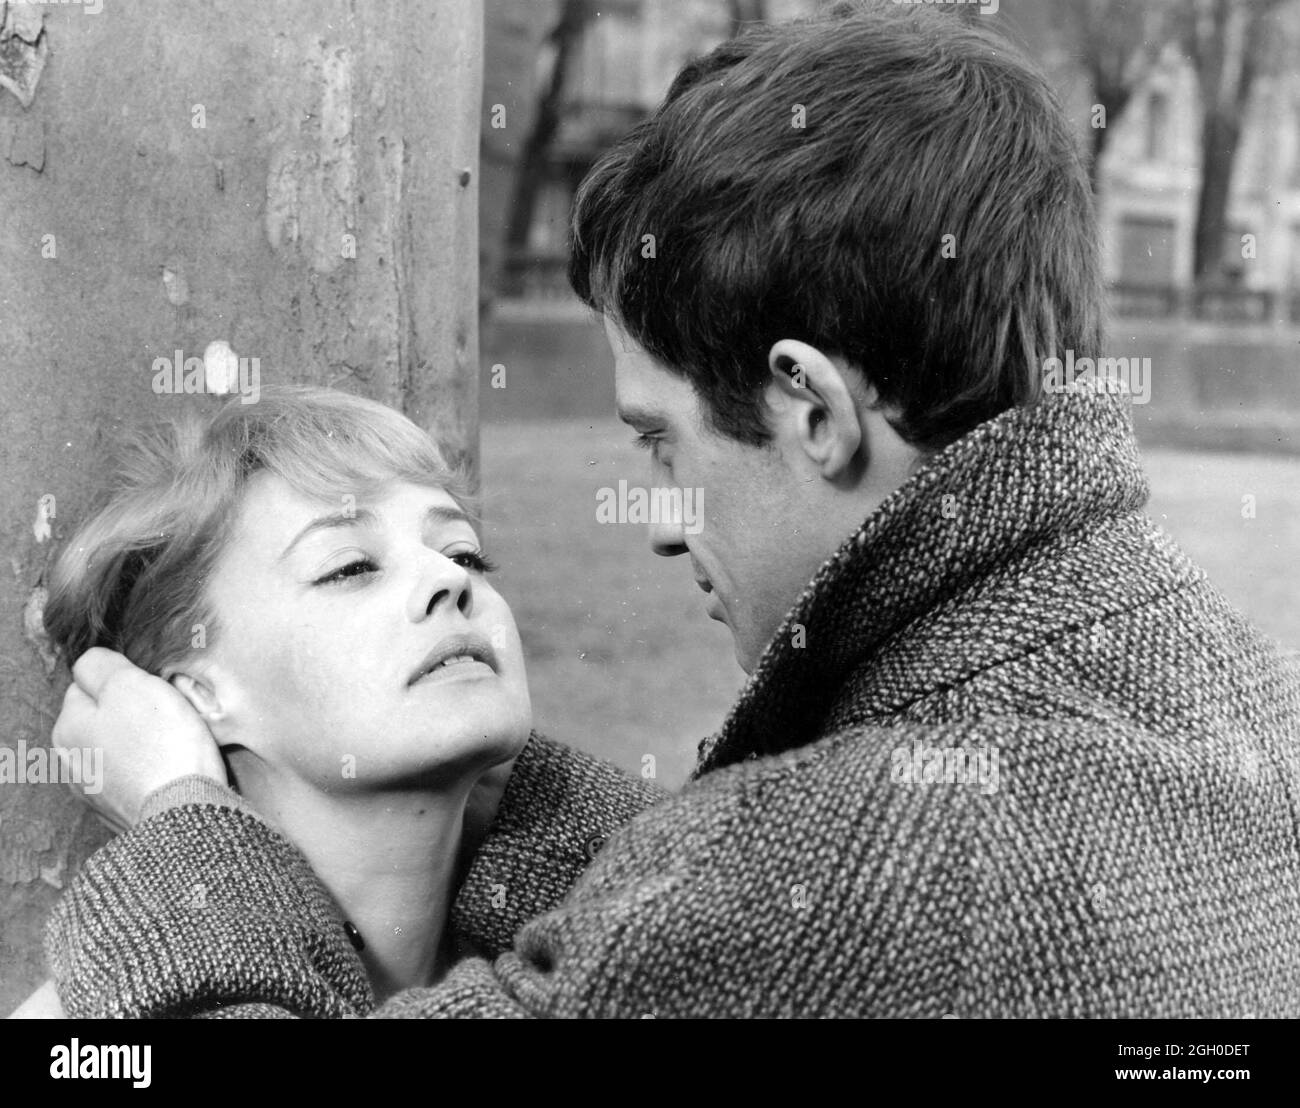 JEANNE MOREAU and JEAN-PAUL BELMONDO in MODERATO CANTABILE (1960), directed by PETER BROOK. Credit: DOCUMENTO FILM/IENA PRODUCTIONS / Album Stock Photo